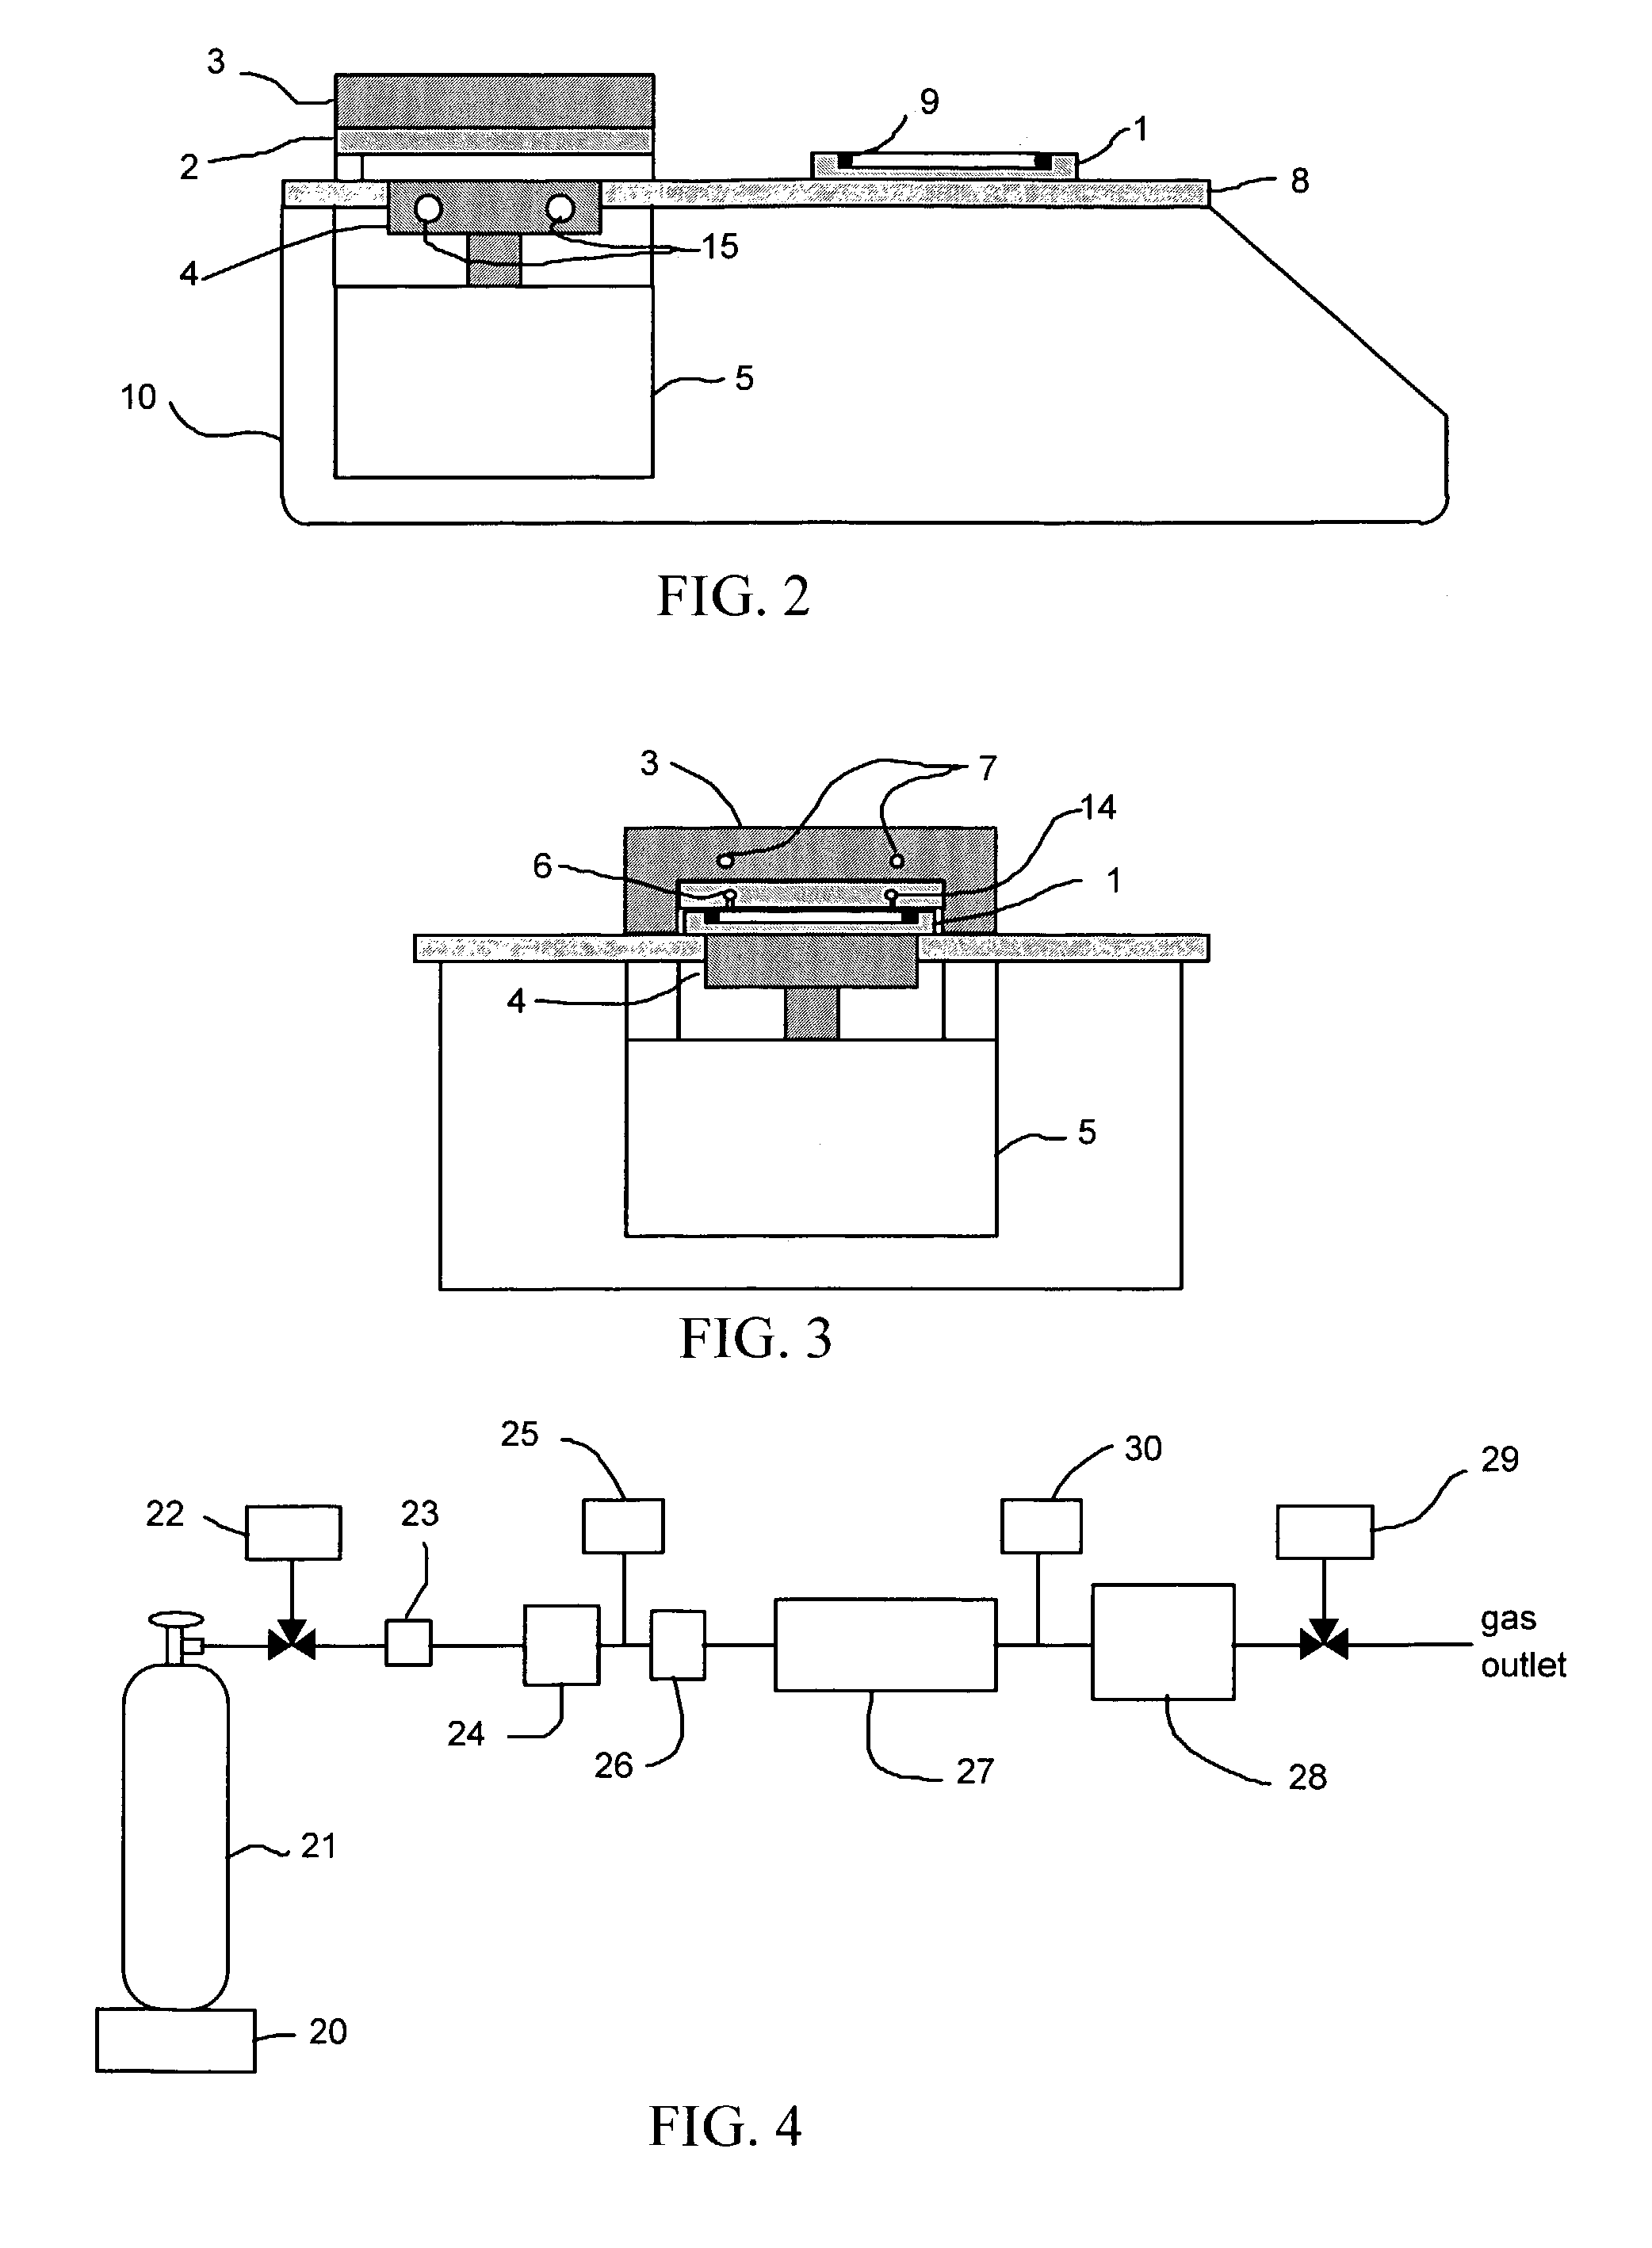 Pressure processing apparatus with improved heating and closure system